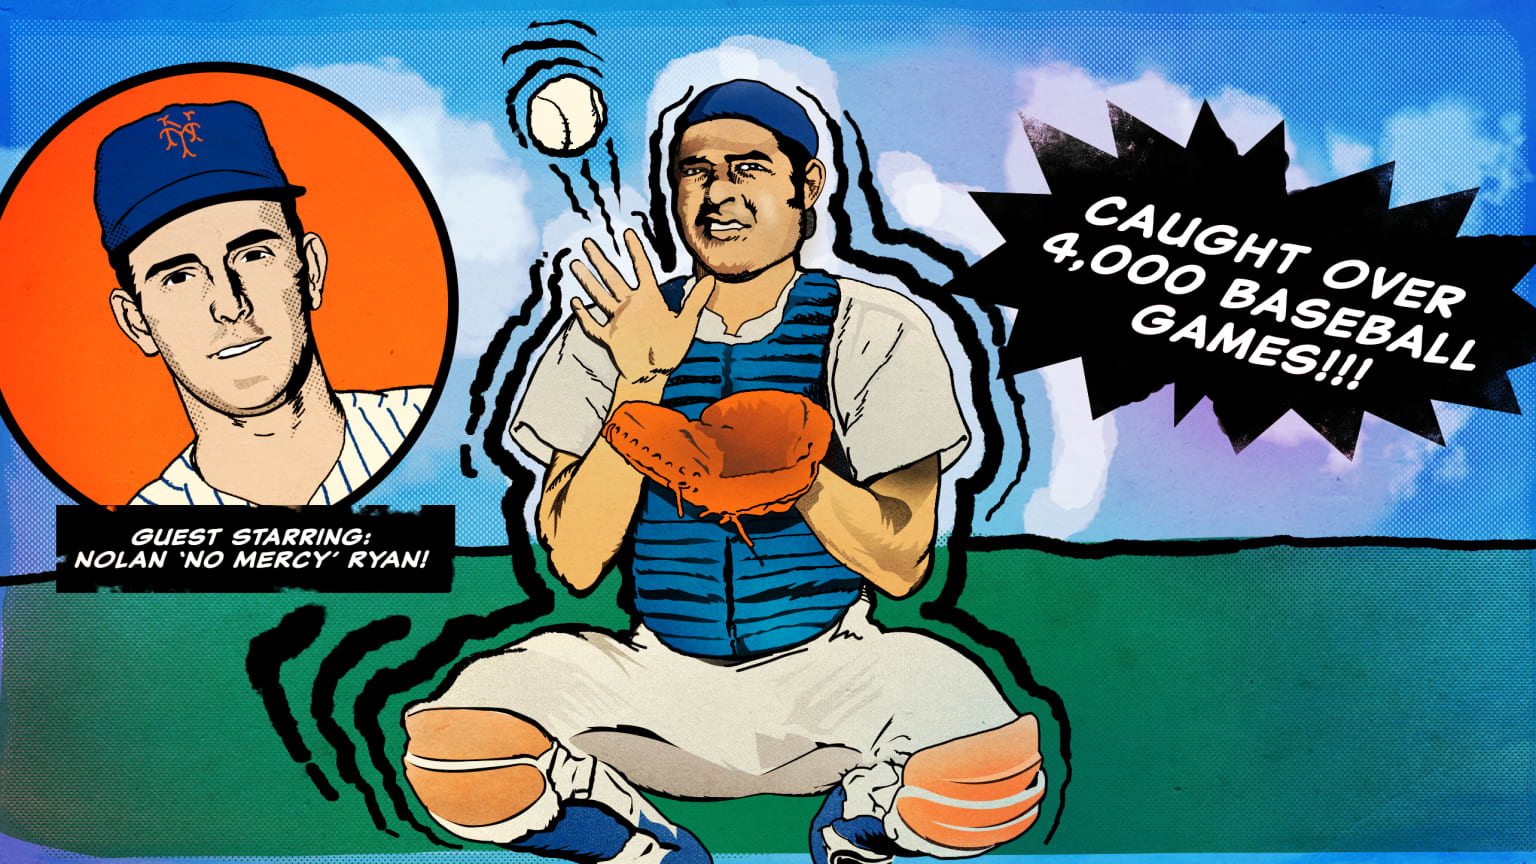 A photo illustration shows catcher Frank Estrada catching a baseball with an inset featuring a head shot of Nolan Ryan